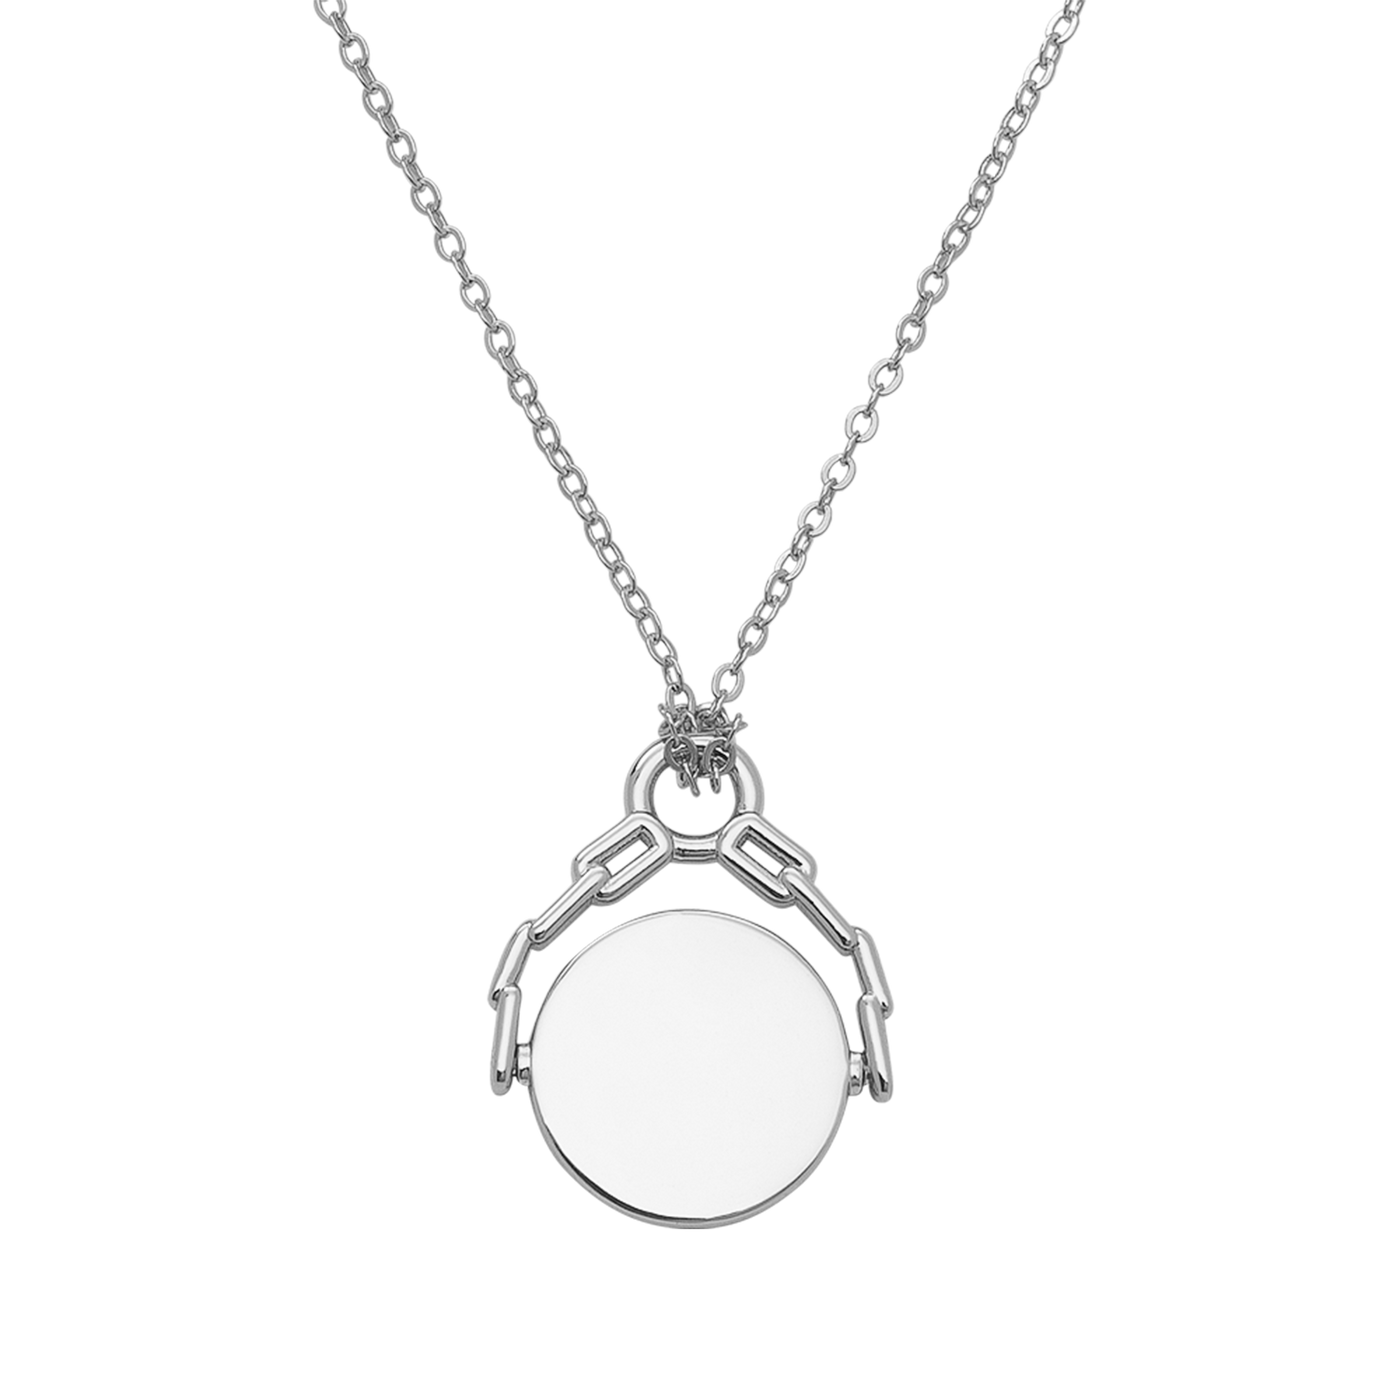 Gloria necklace with engraving 